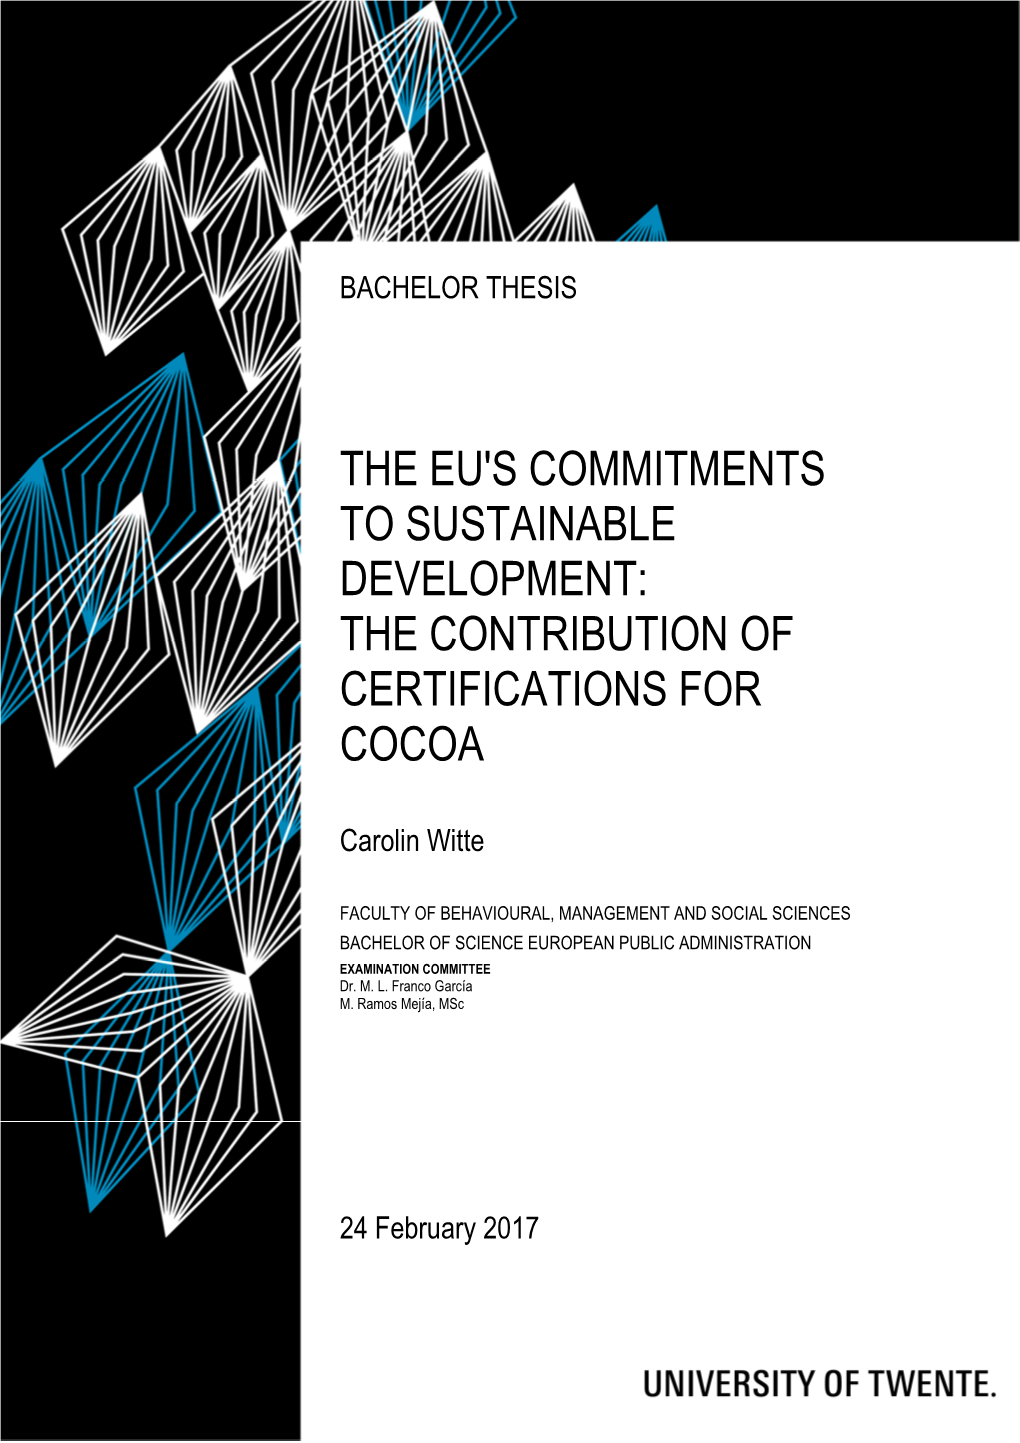 The Eu's Commitments to Sustainable Development: the Contribution of Certifications for Cocoa